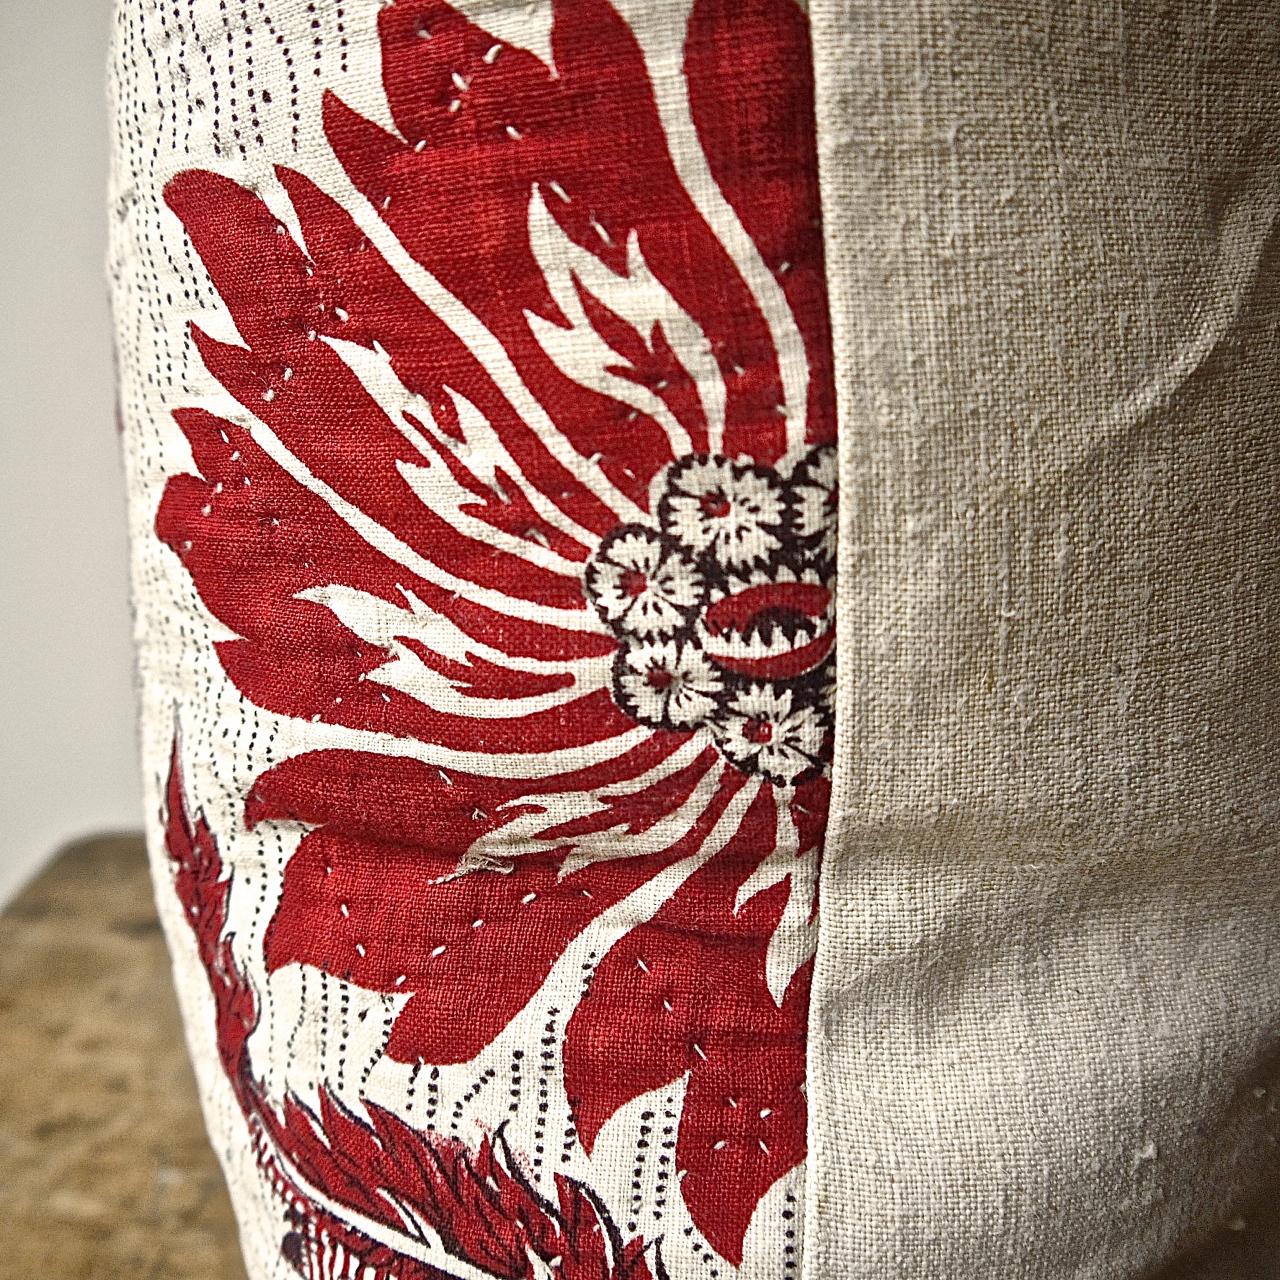 Red and White Stylised Flower Block Printed Cotton Pillow, French, 18th Century For Sale 3